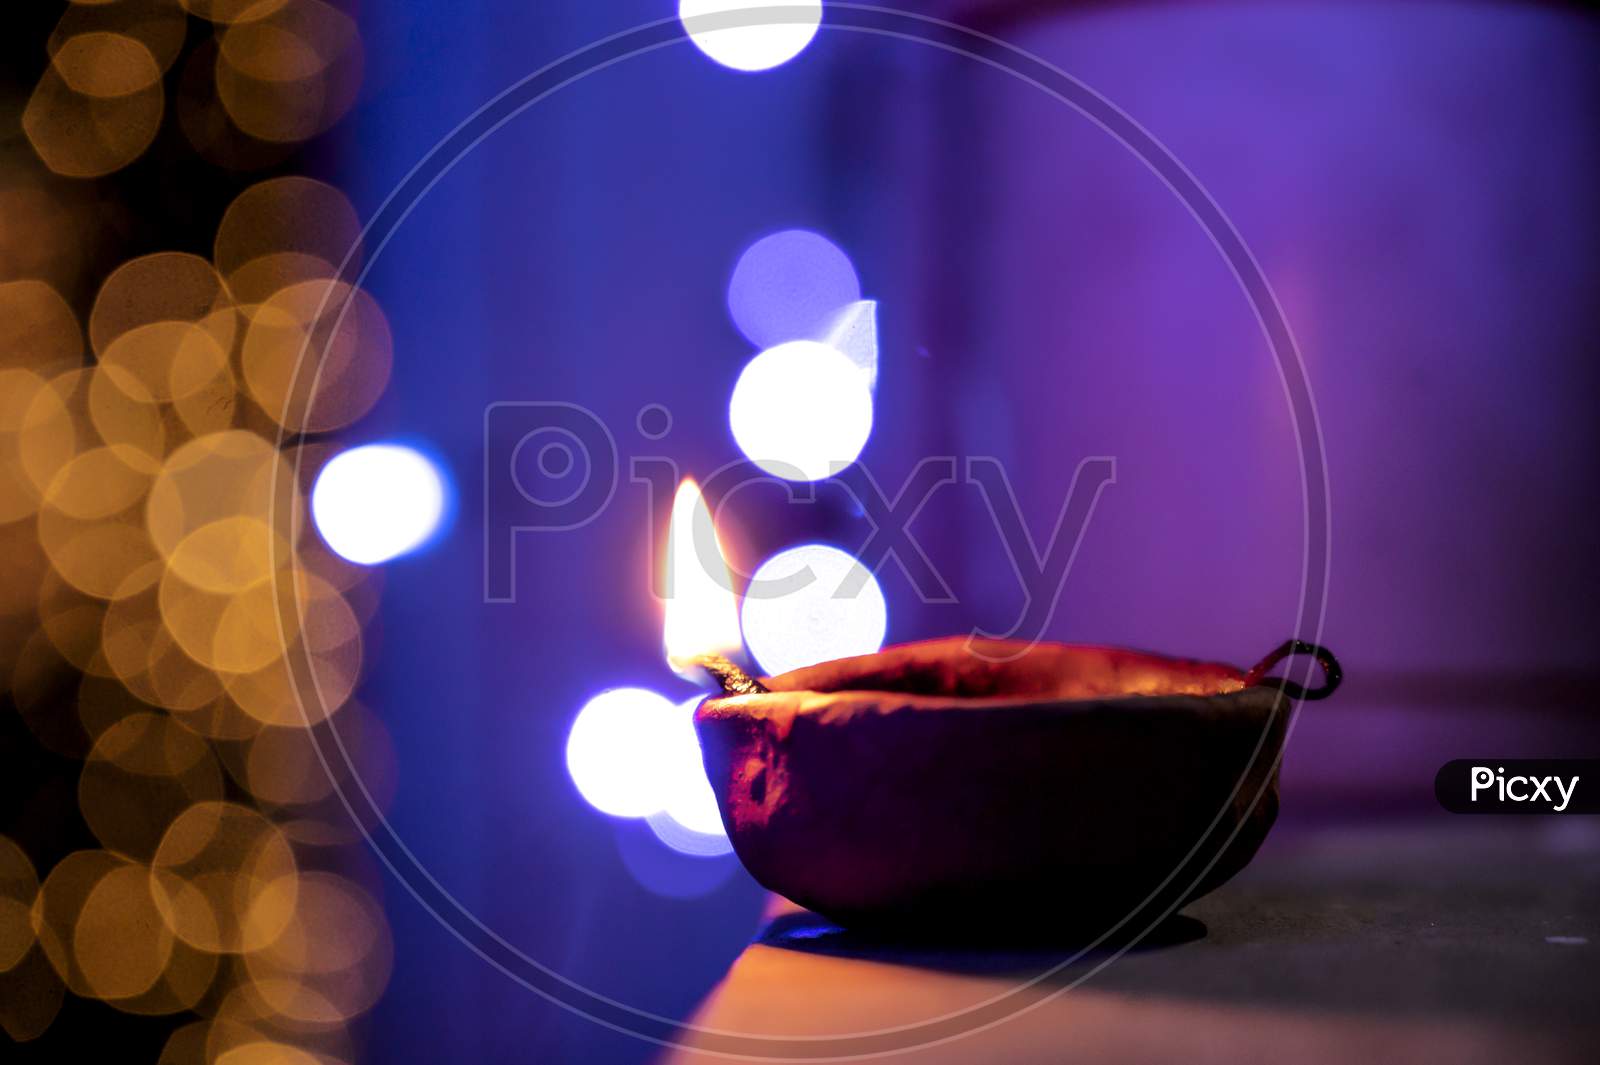 Lighted diya lamp in the auspicious occasion of Diwali